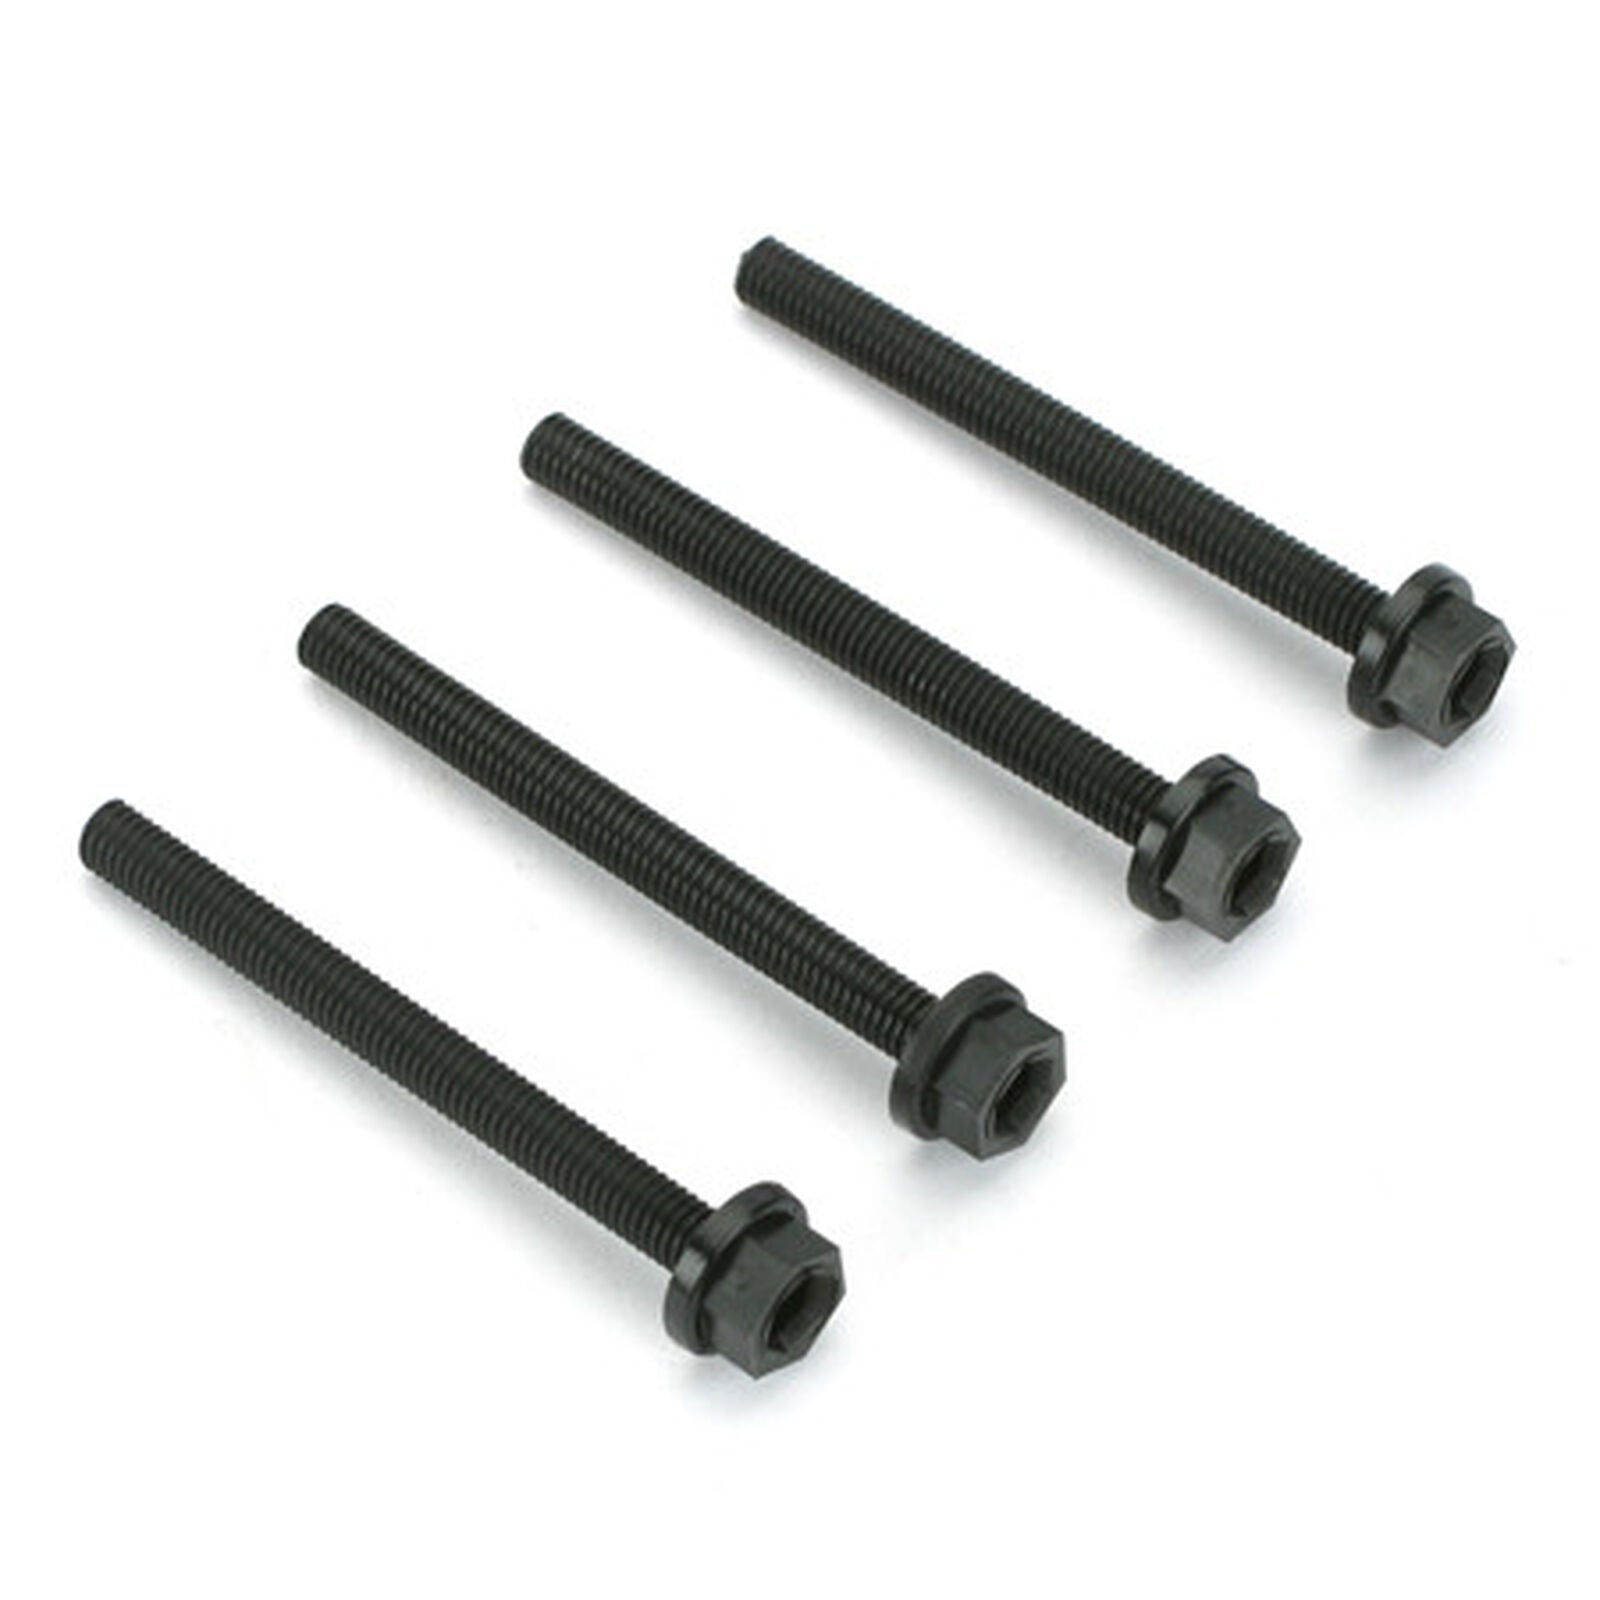 DUBRO 164 Wing Bolts, 10-32 x 2"